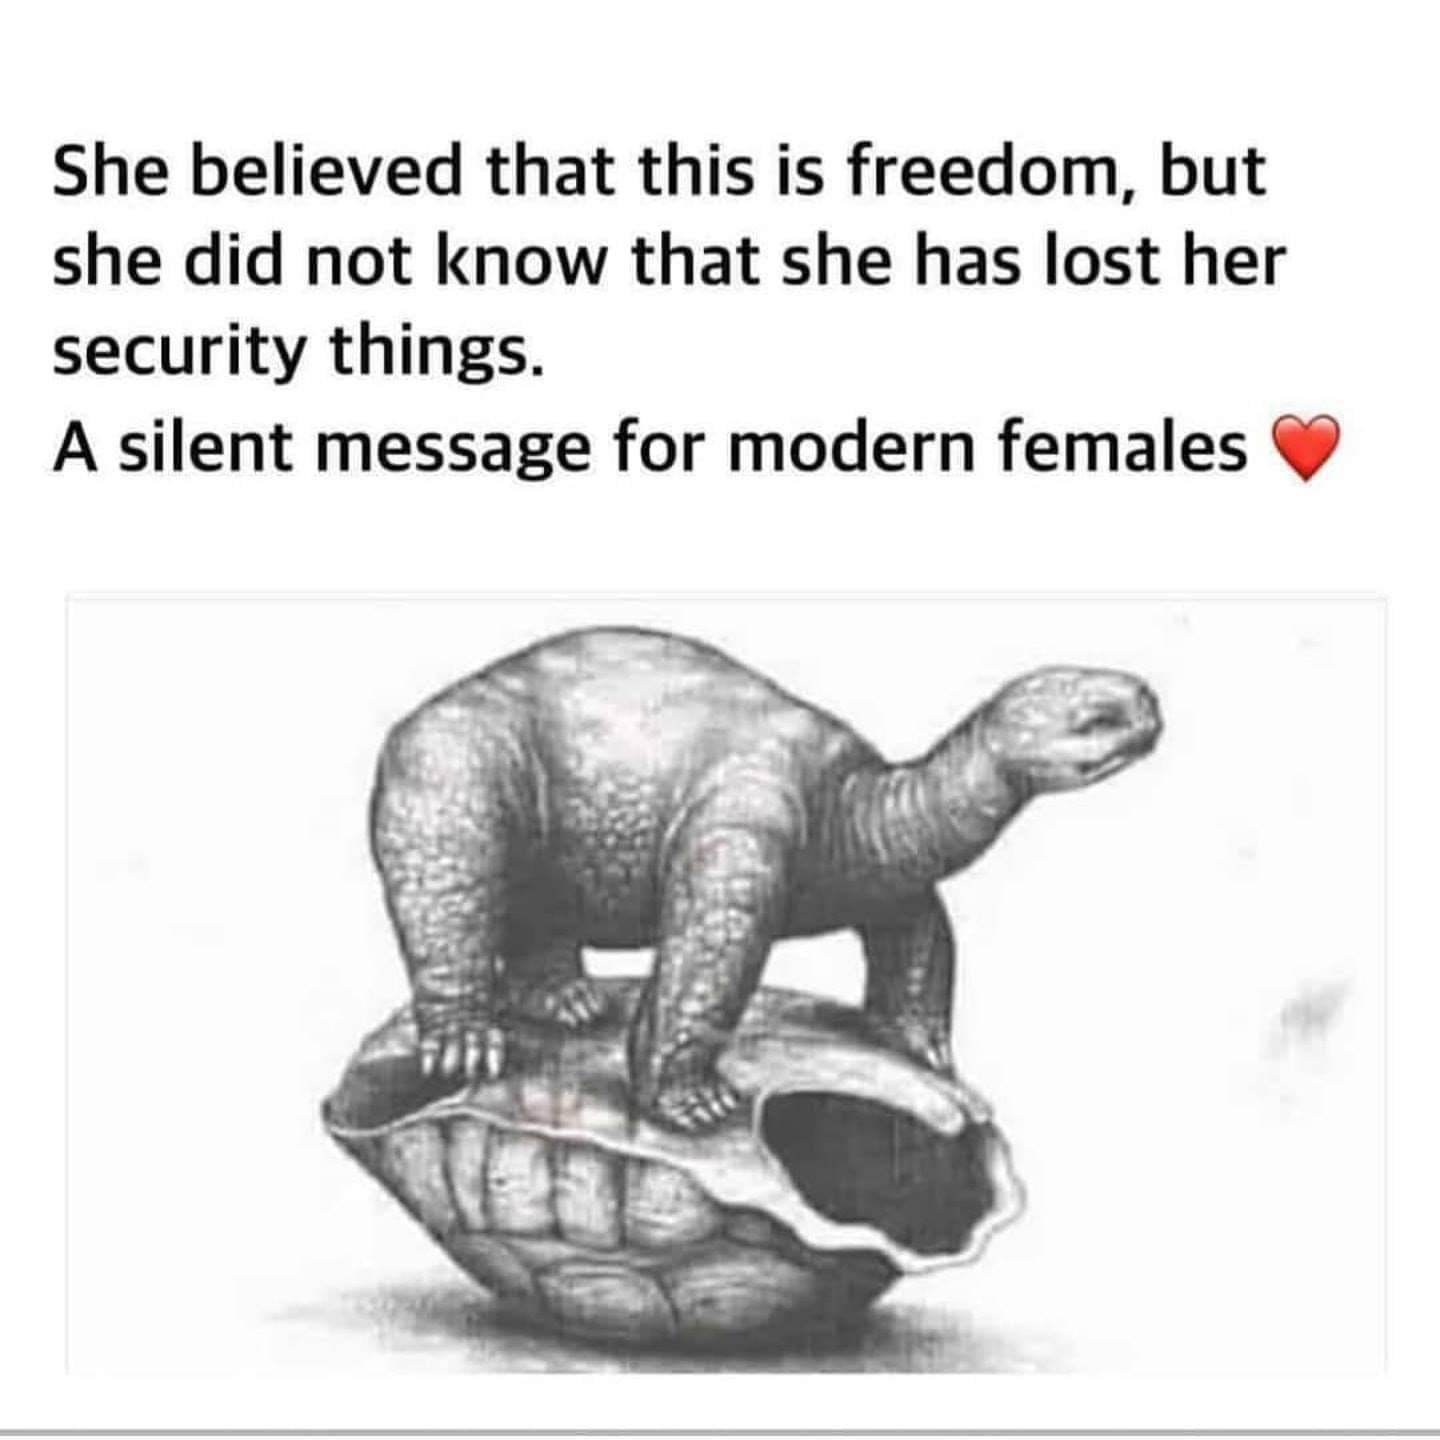 She believed that this is freedom but she did not know that she has lost her security